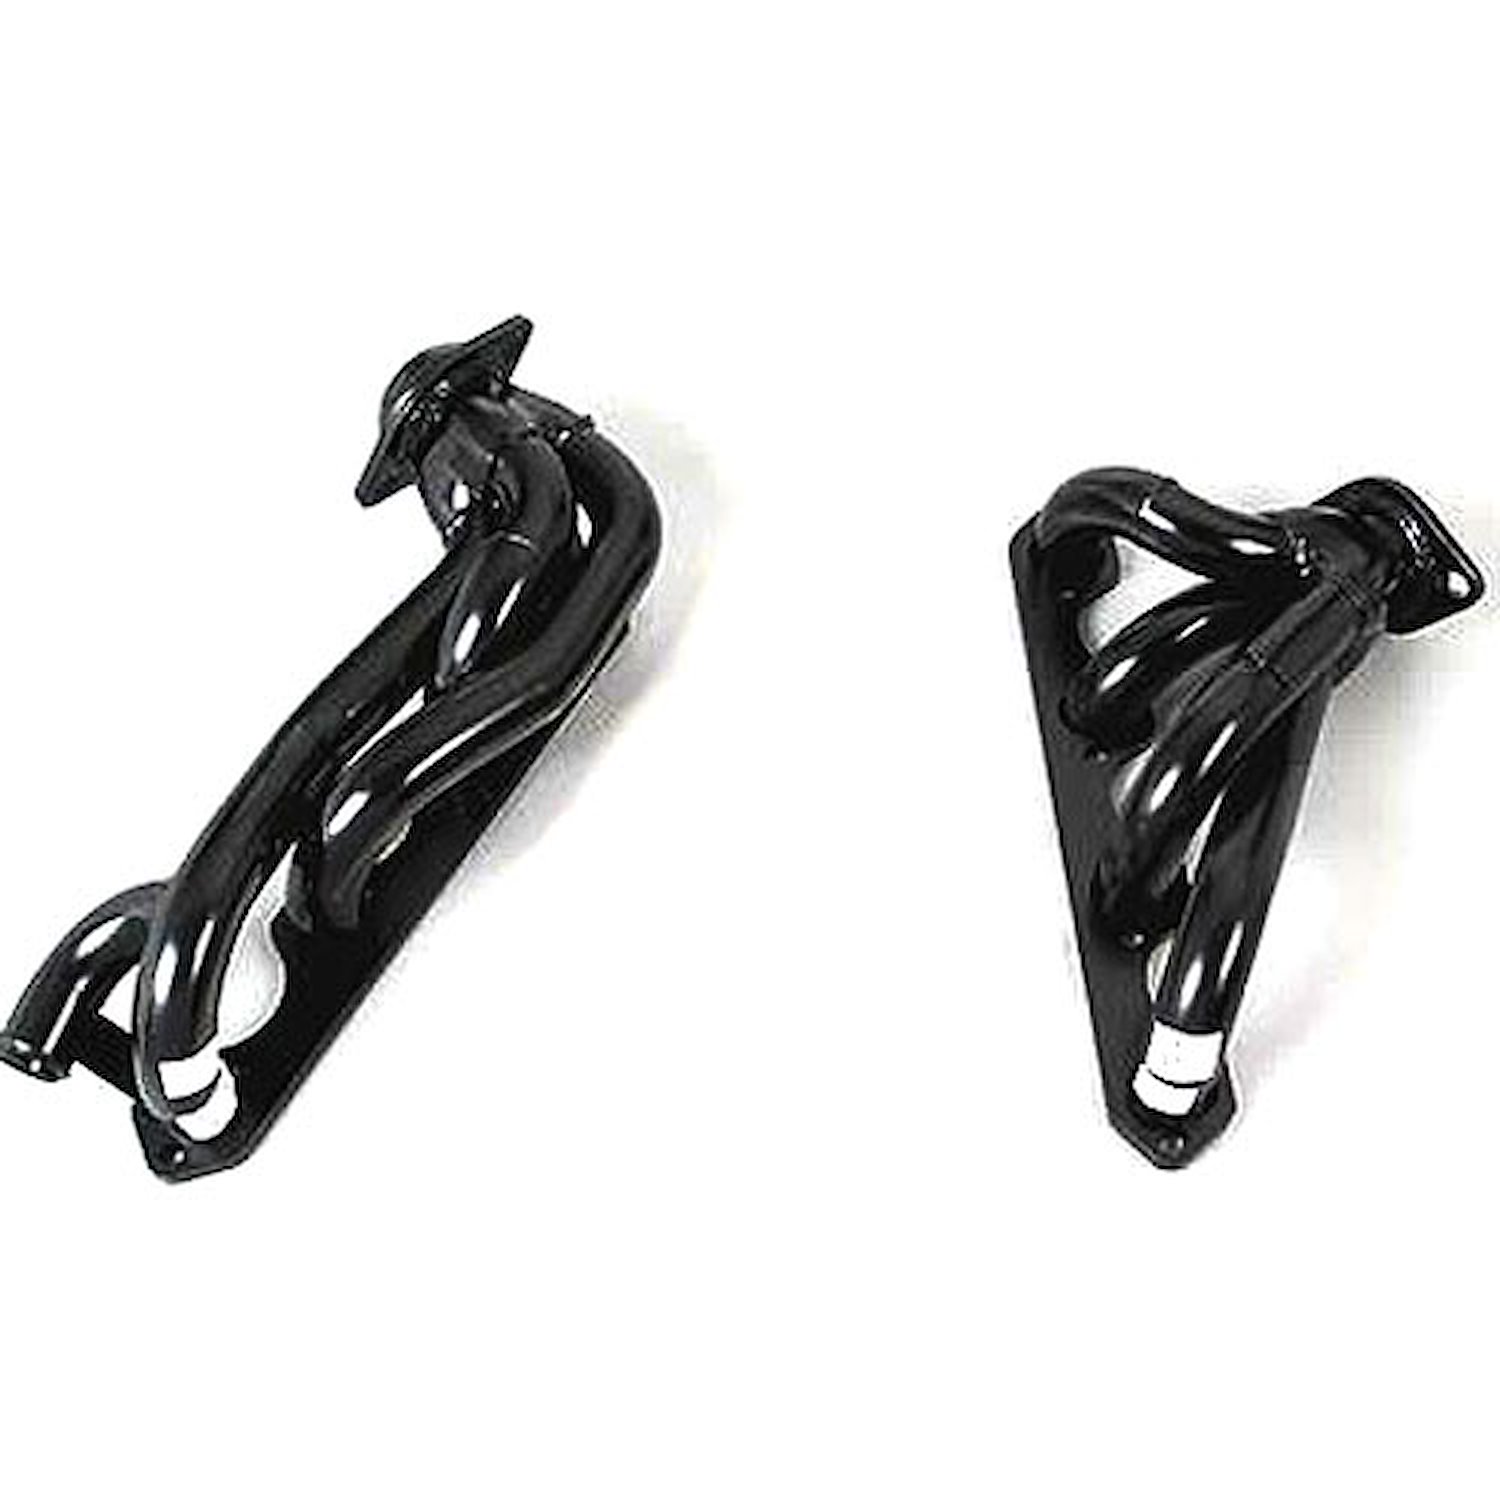 Painted Truck Headers 1987-95 F-150/F-250 and Bronco 2/4WD 5.8L